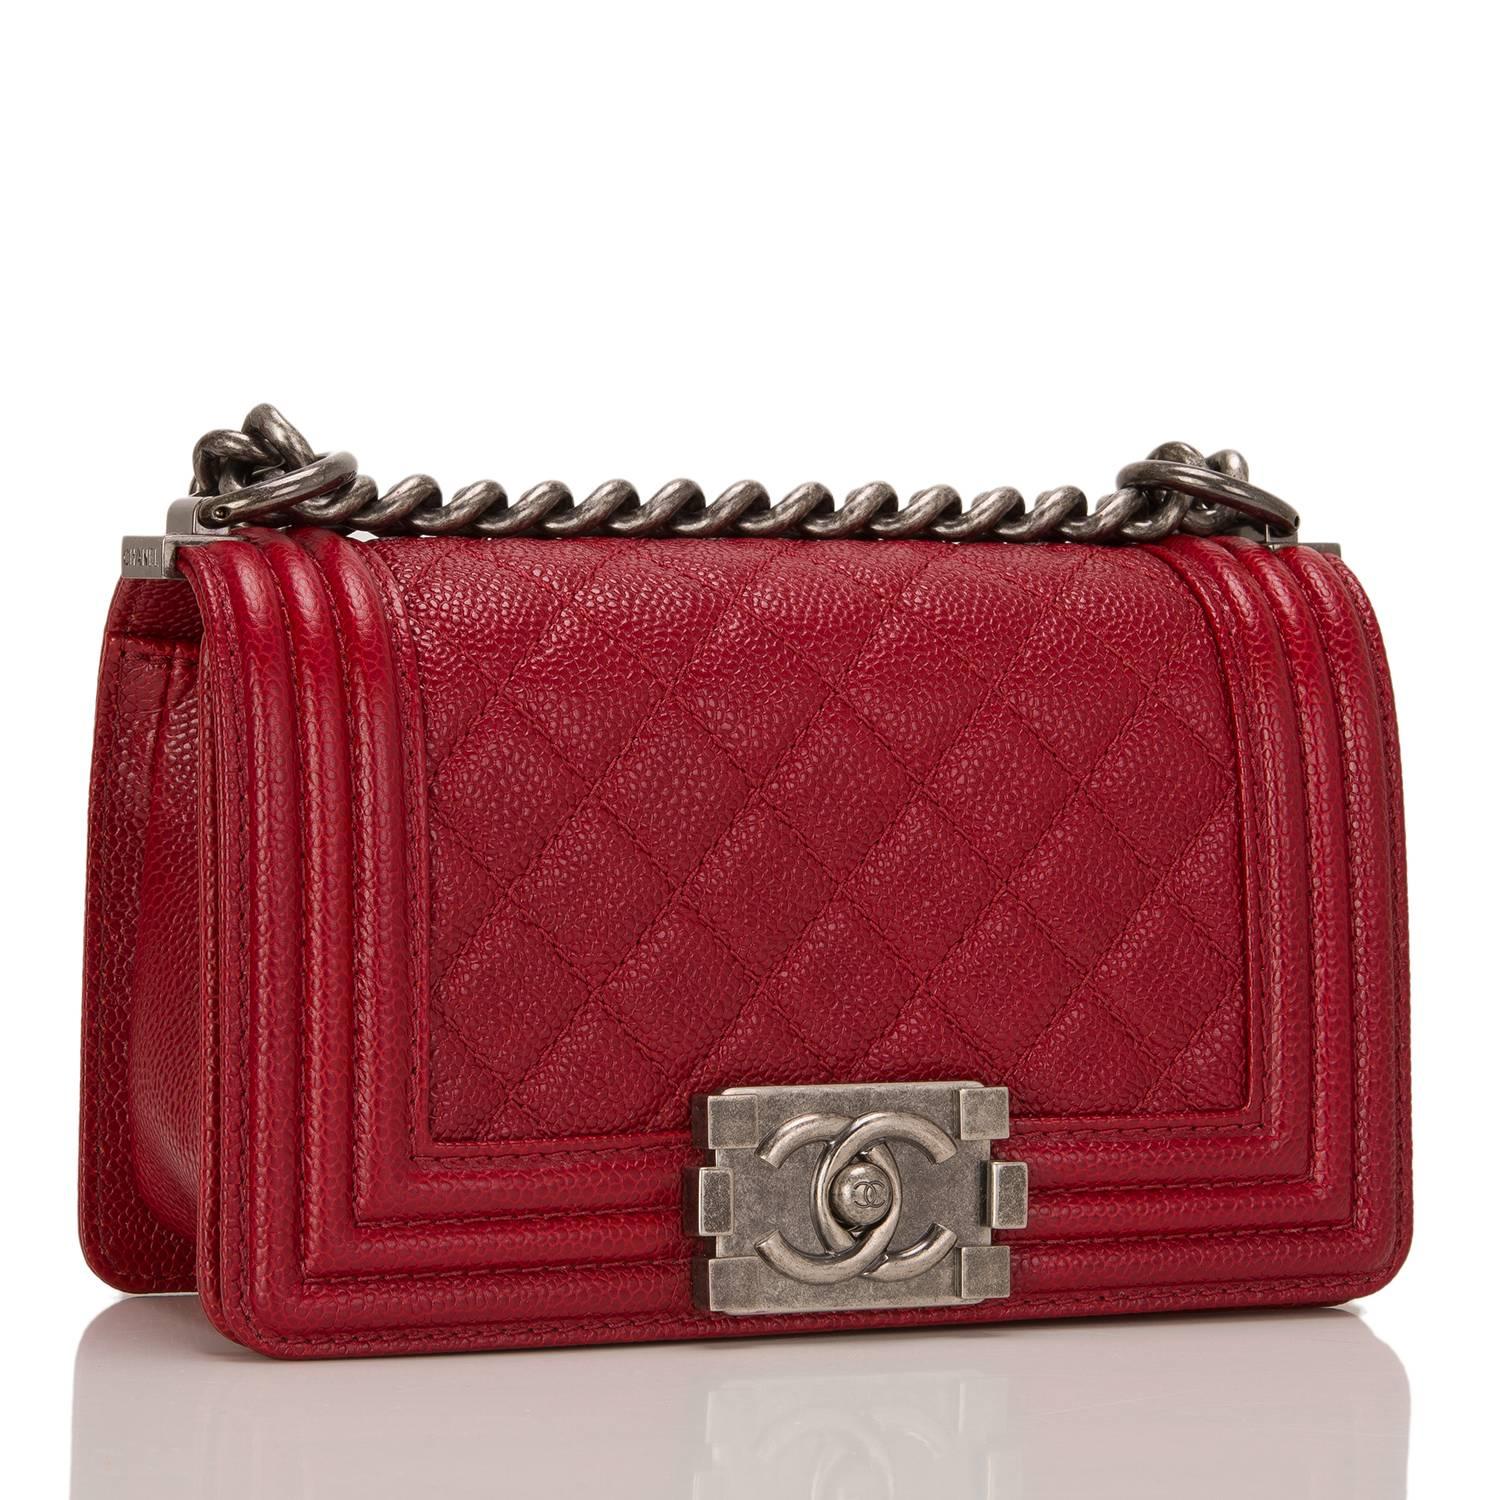 Chanel Small Boy bag in dark red caviar leather with aged ruthenium hardware.

This bag has a front flap with Le Boy CC push lock closure, and aged ruthenium chain link and red leather padded shoulder strap.

The interior is lined in red fabric